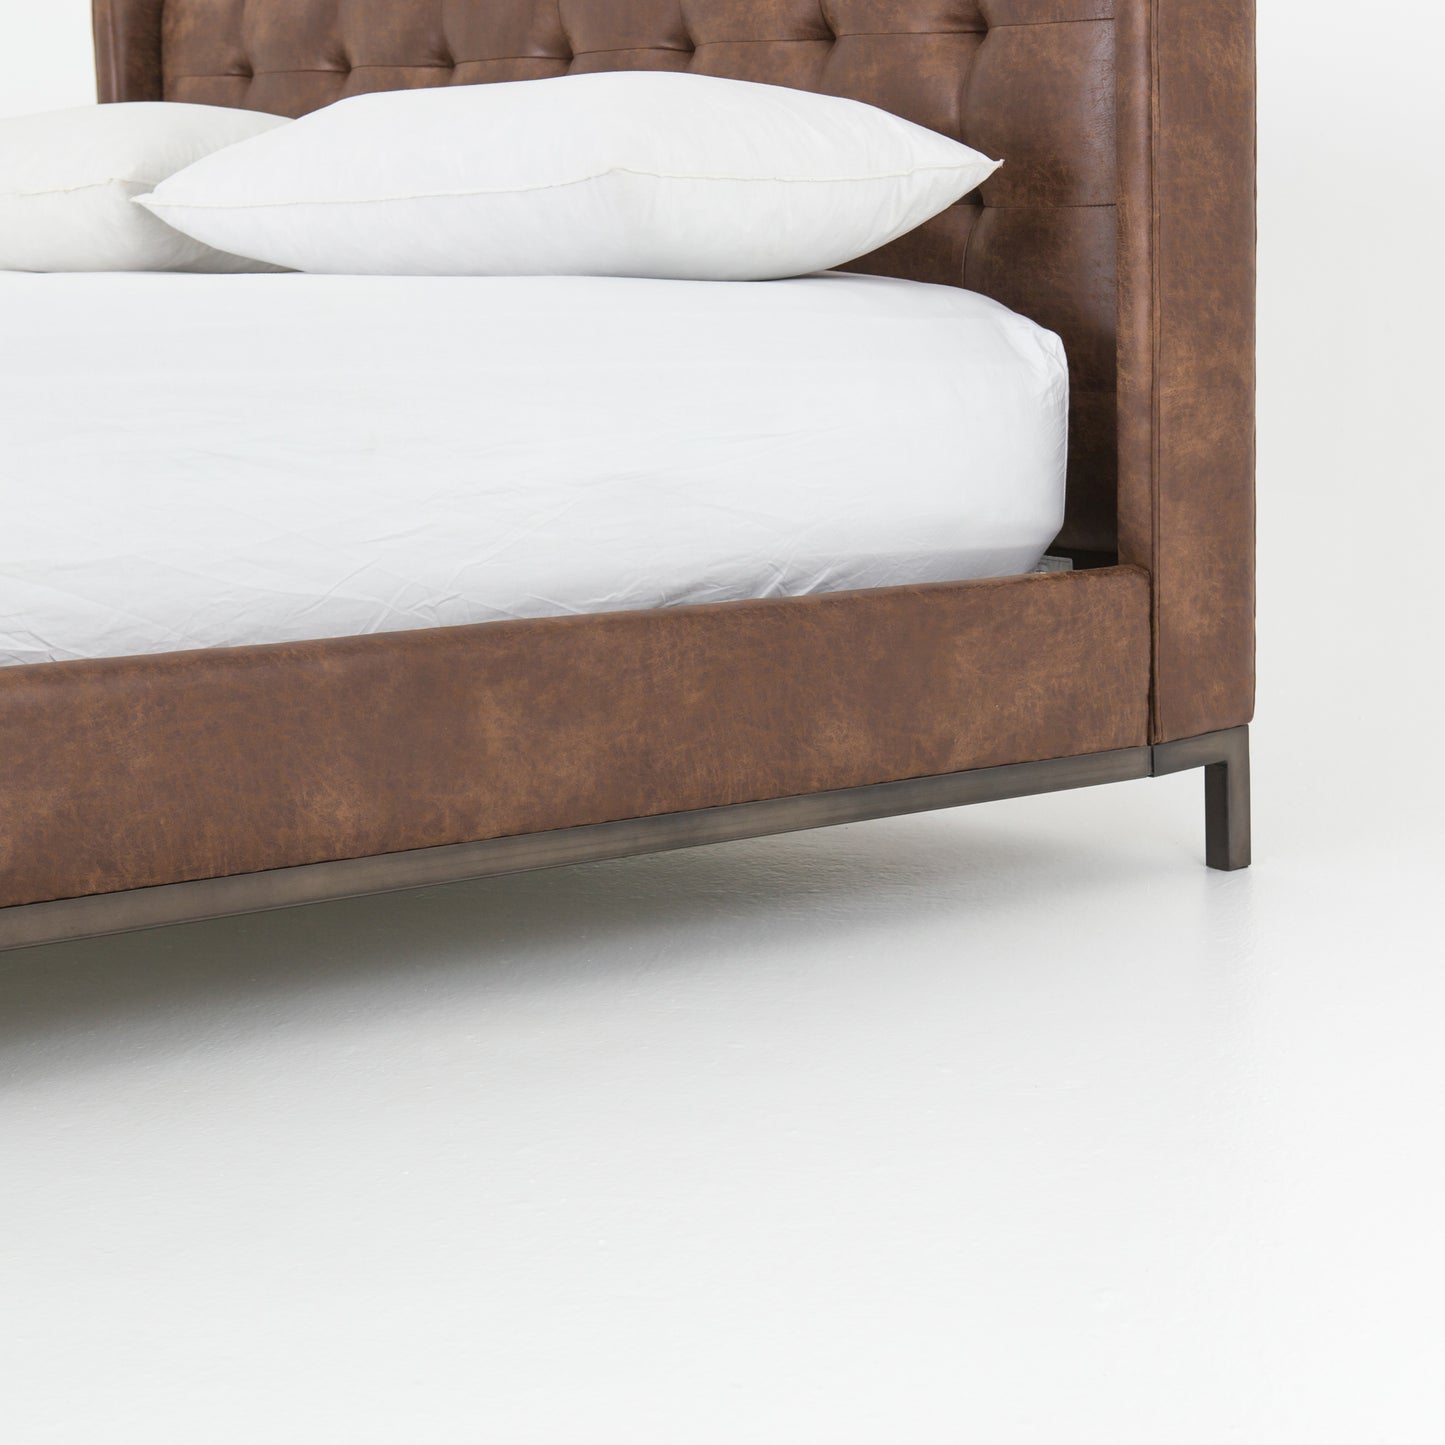 Newhall bed